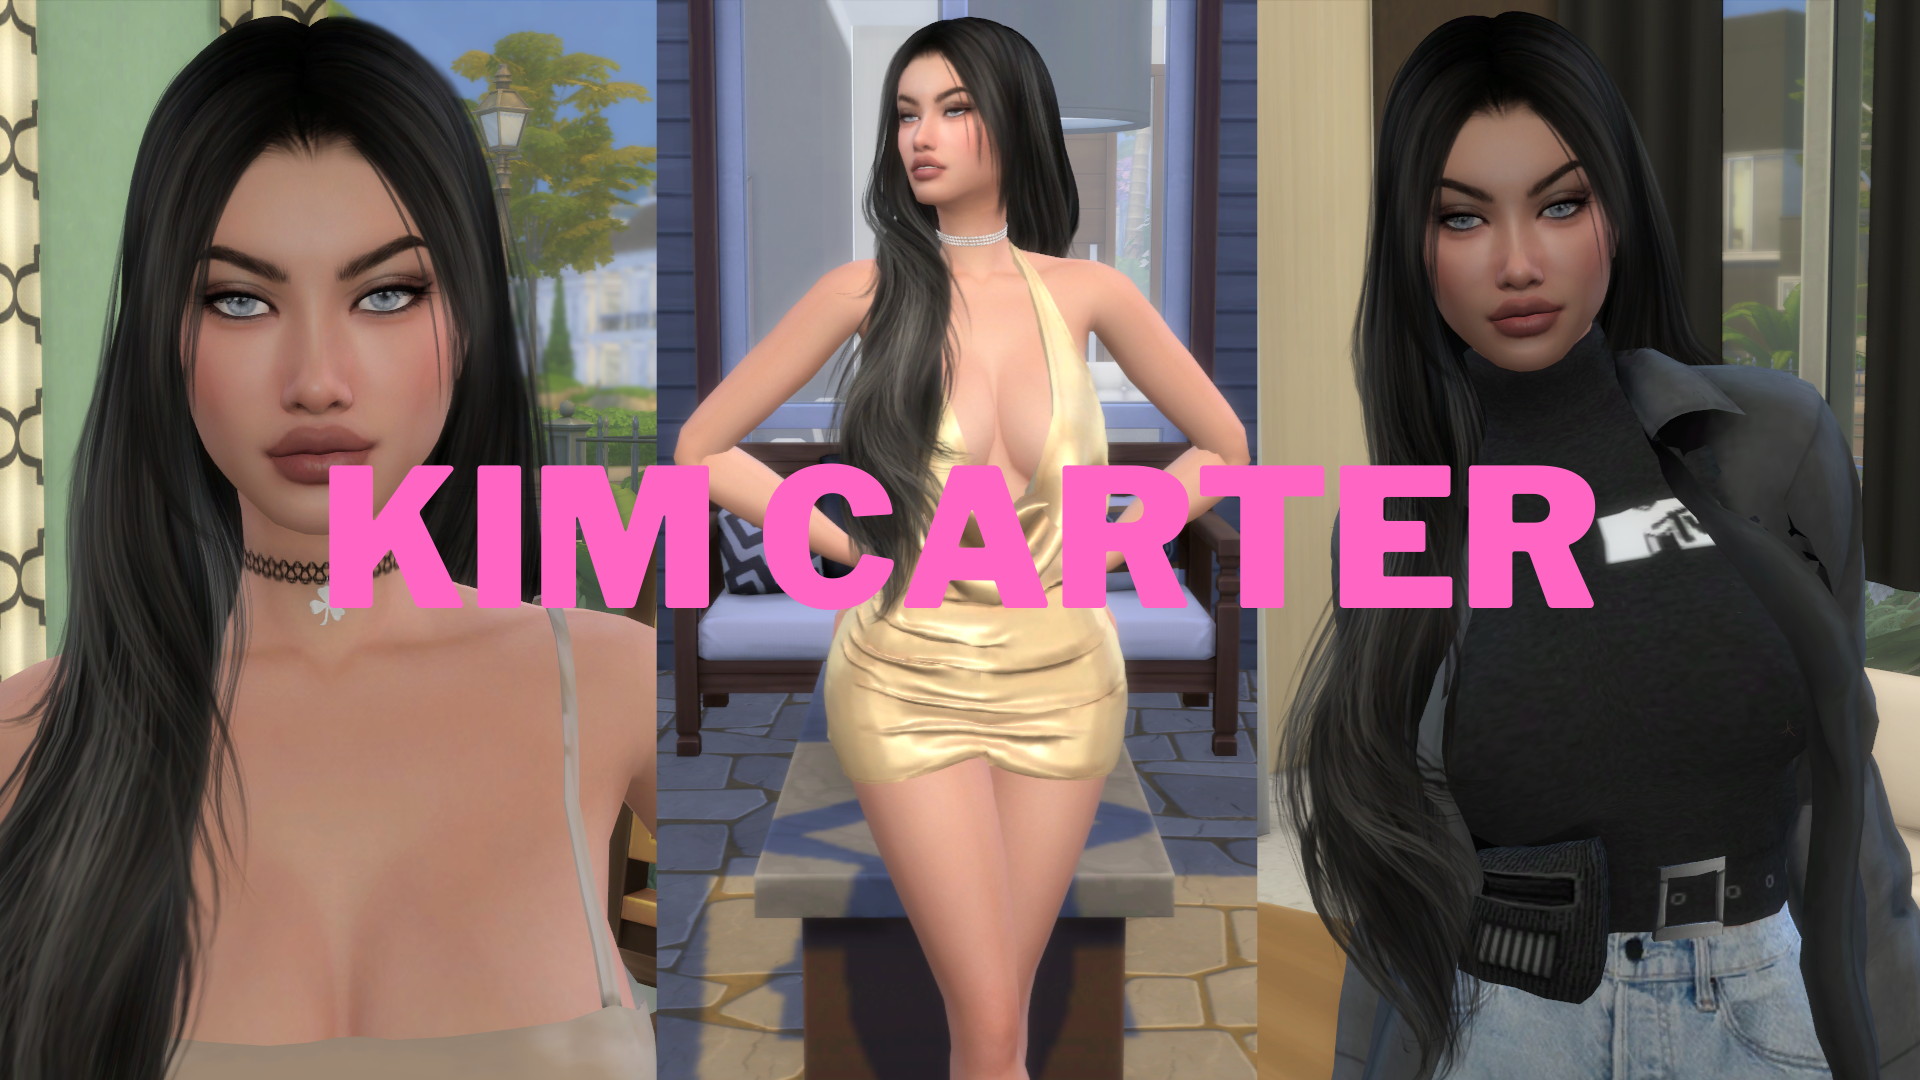 KIMCARTER.png.4db1534548a7bf486df1b5603881a767.png